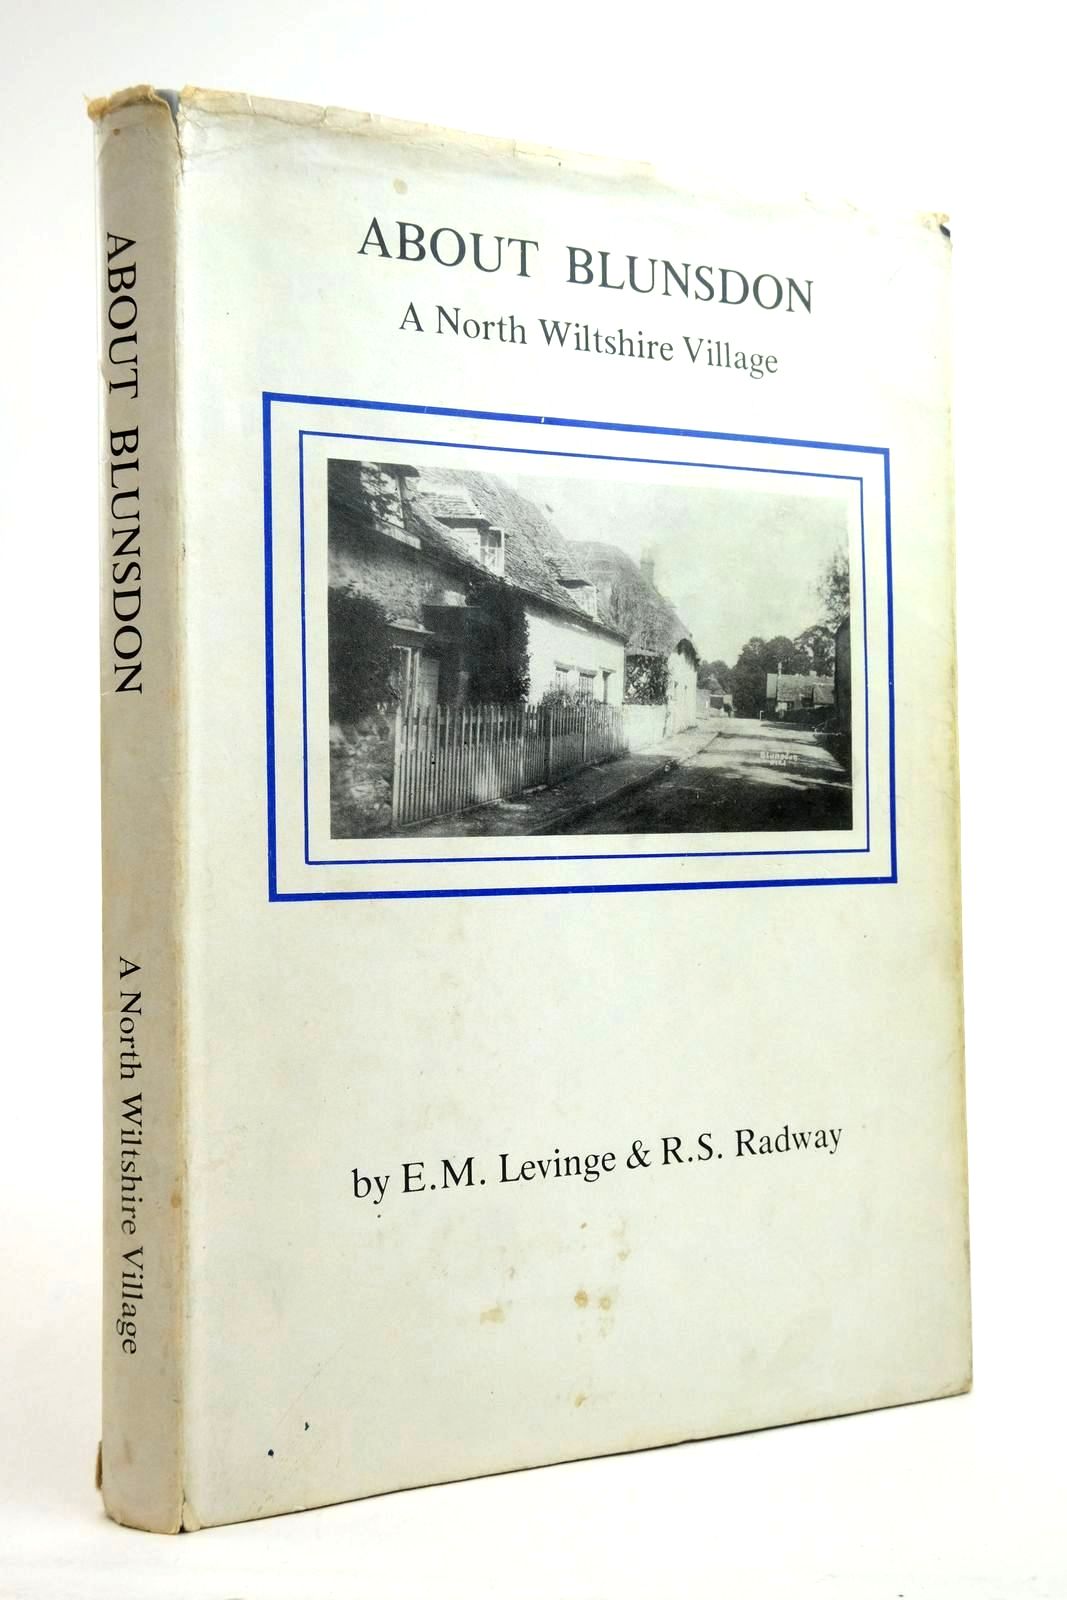 Photo of ABOUT BLUNSDON written by Levinge, E.M. Radway, R.S. published by Highworth Printing Services (STOCK CODE: 2136364)  for sale by Stella & Rose's Books